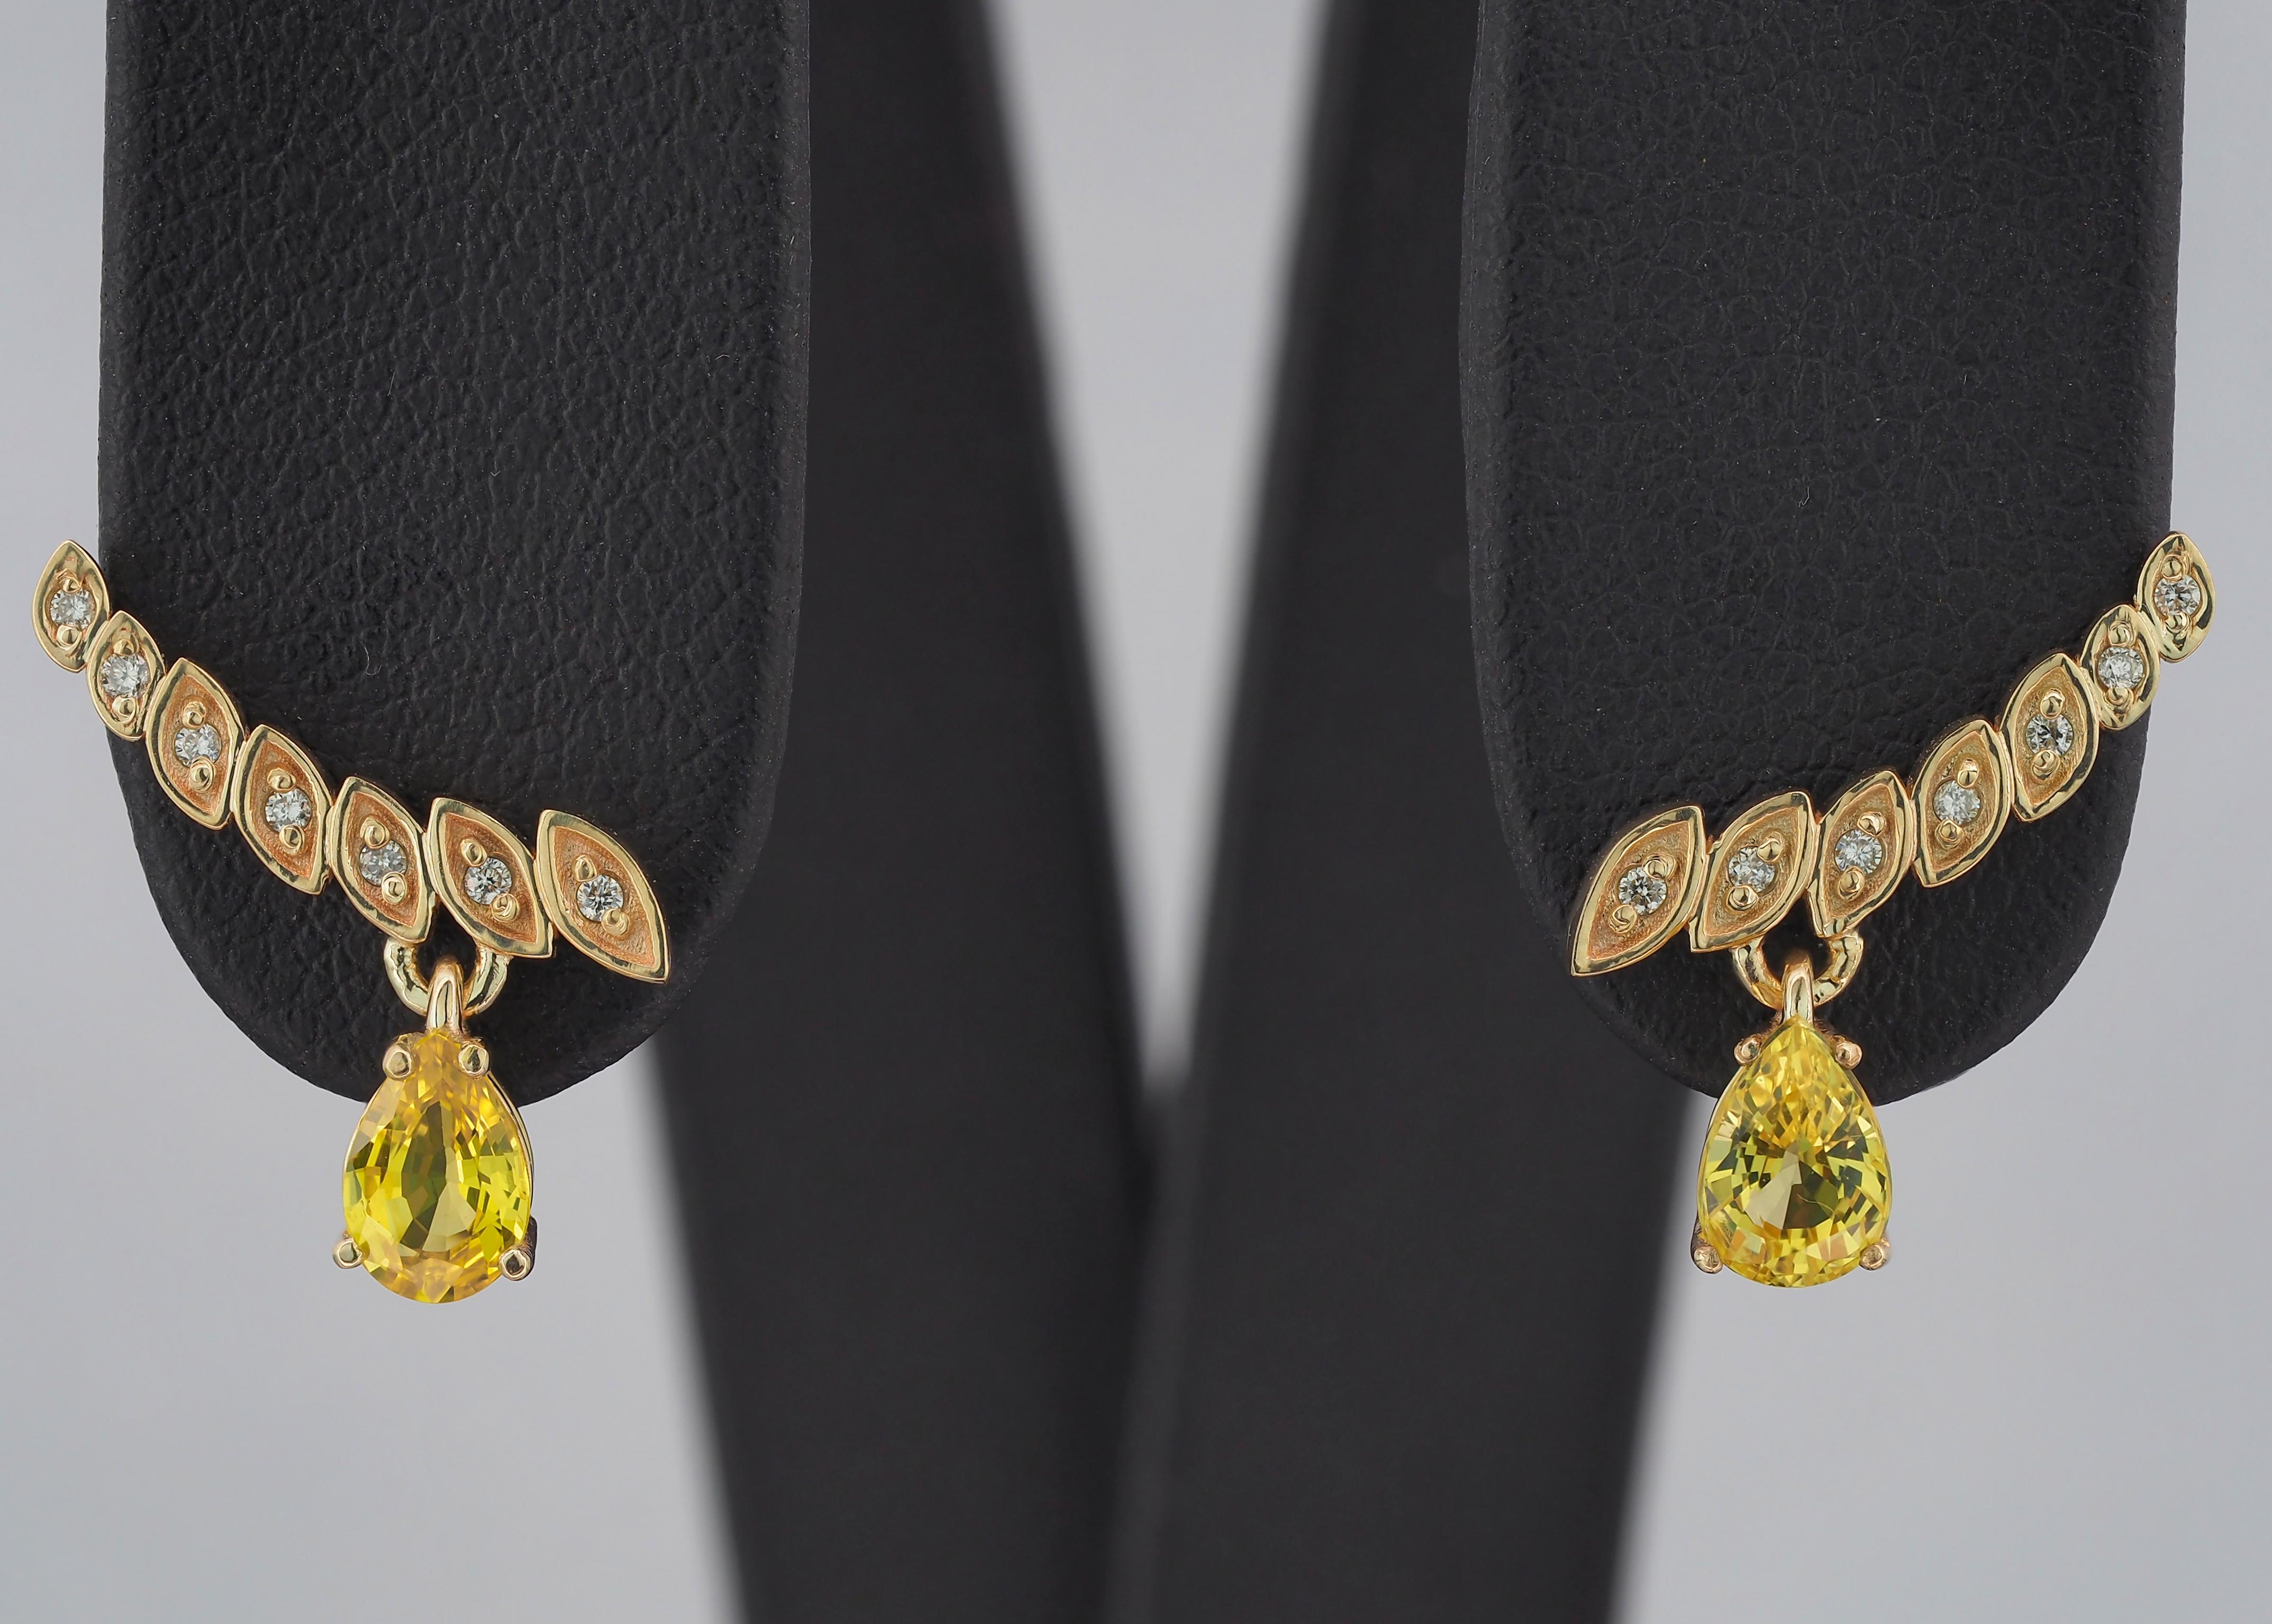 Yellow sapphires and diamonds earrings studs. 
14k solid gold studs. Pear cut sapphire earrings. September birthstone studs.

Total weight: 2.3 g.
Metal: 14k gold.
Size 15.5x10 mm.

Central stones: Natural Sapphires - 2 pieces
Cut: Pear
Weight: aprx